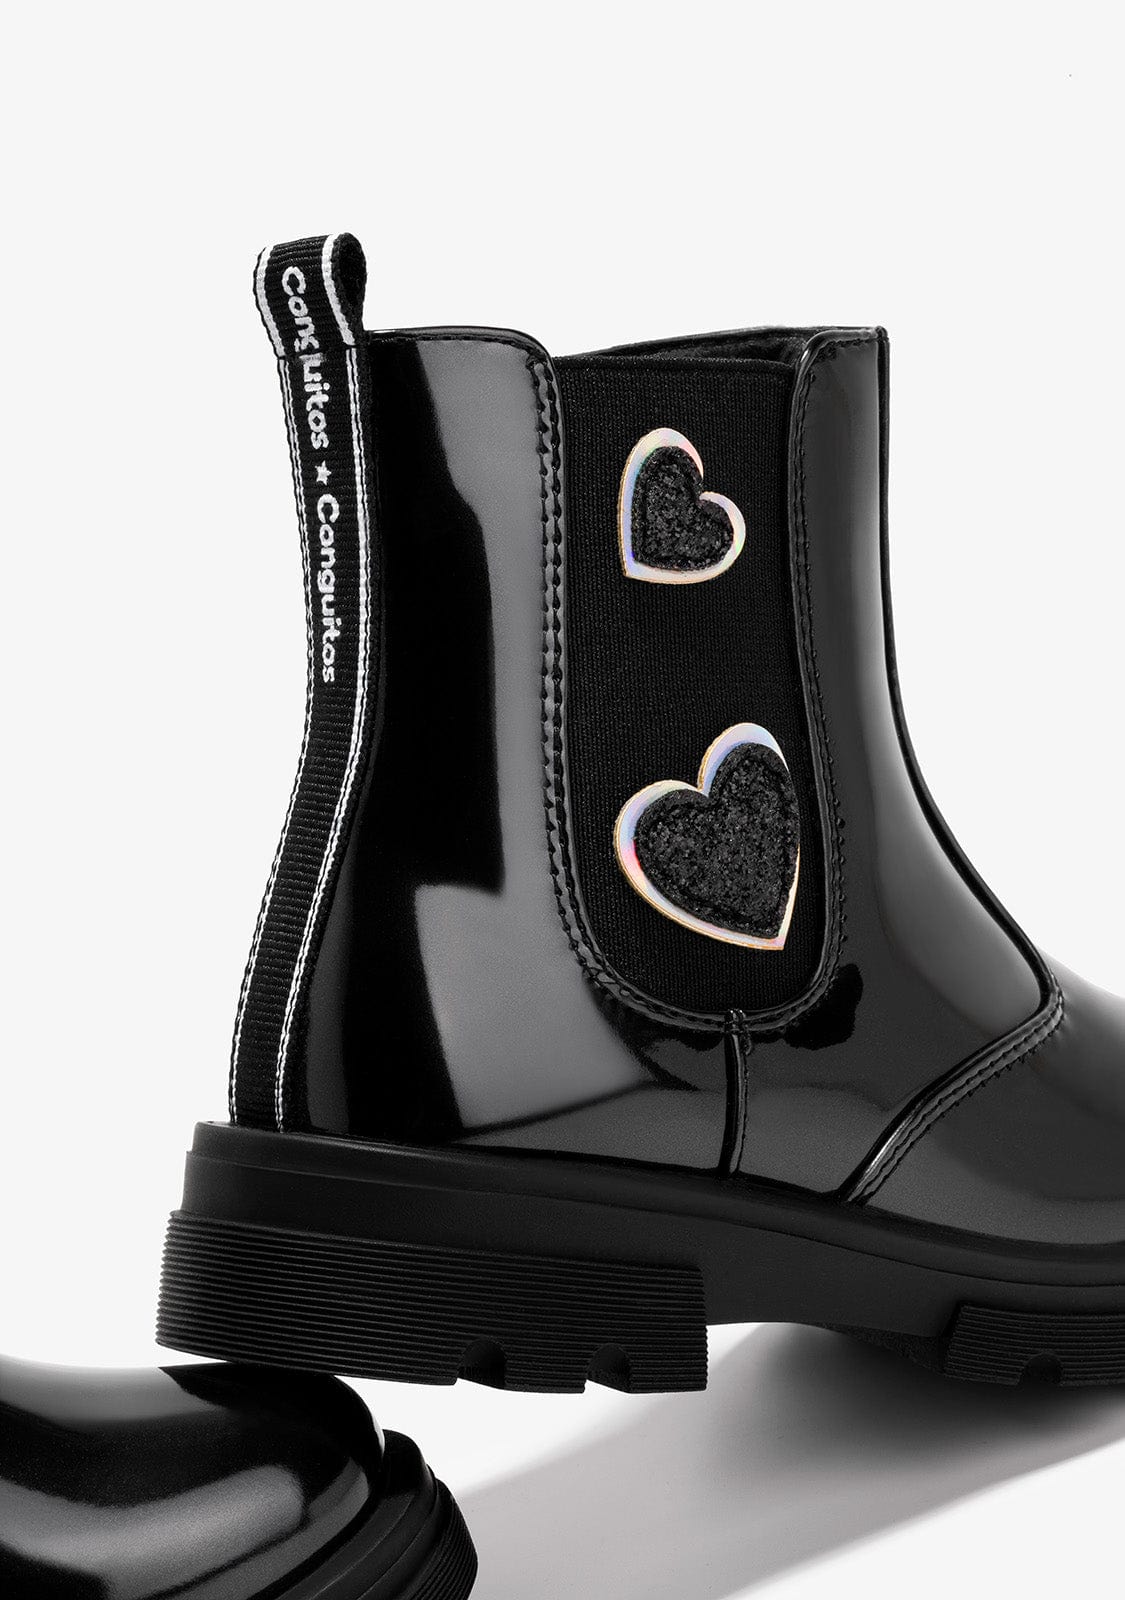 CONGUITOS Shoes Girl's Black Hearts Ankle Boots Patent Leather